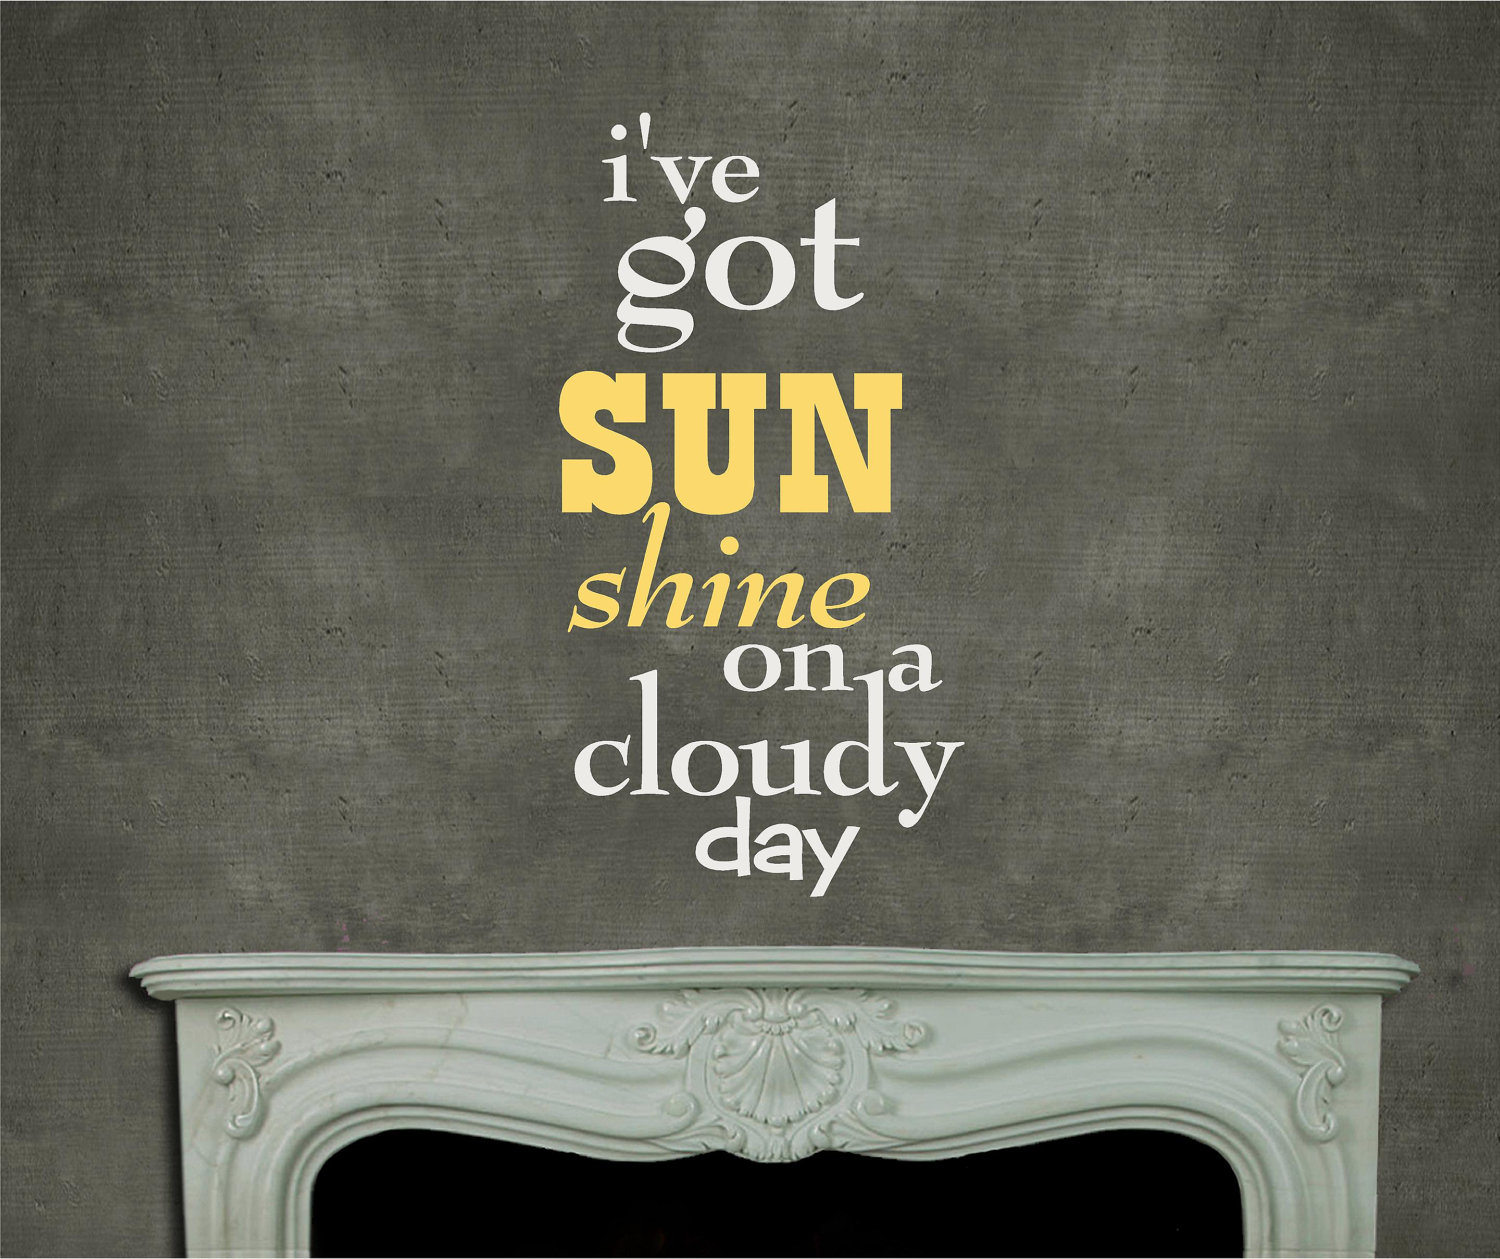 Cloudy Day Quotes And Sayings. QuotesGram1500 x 1259